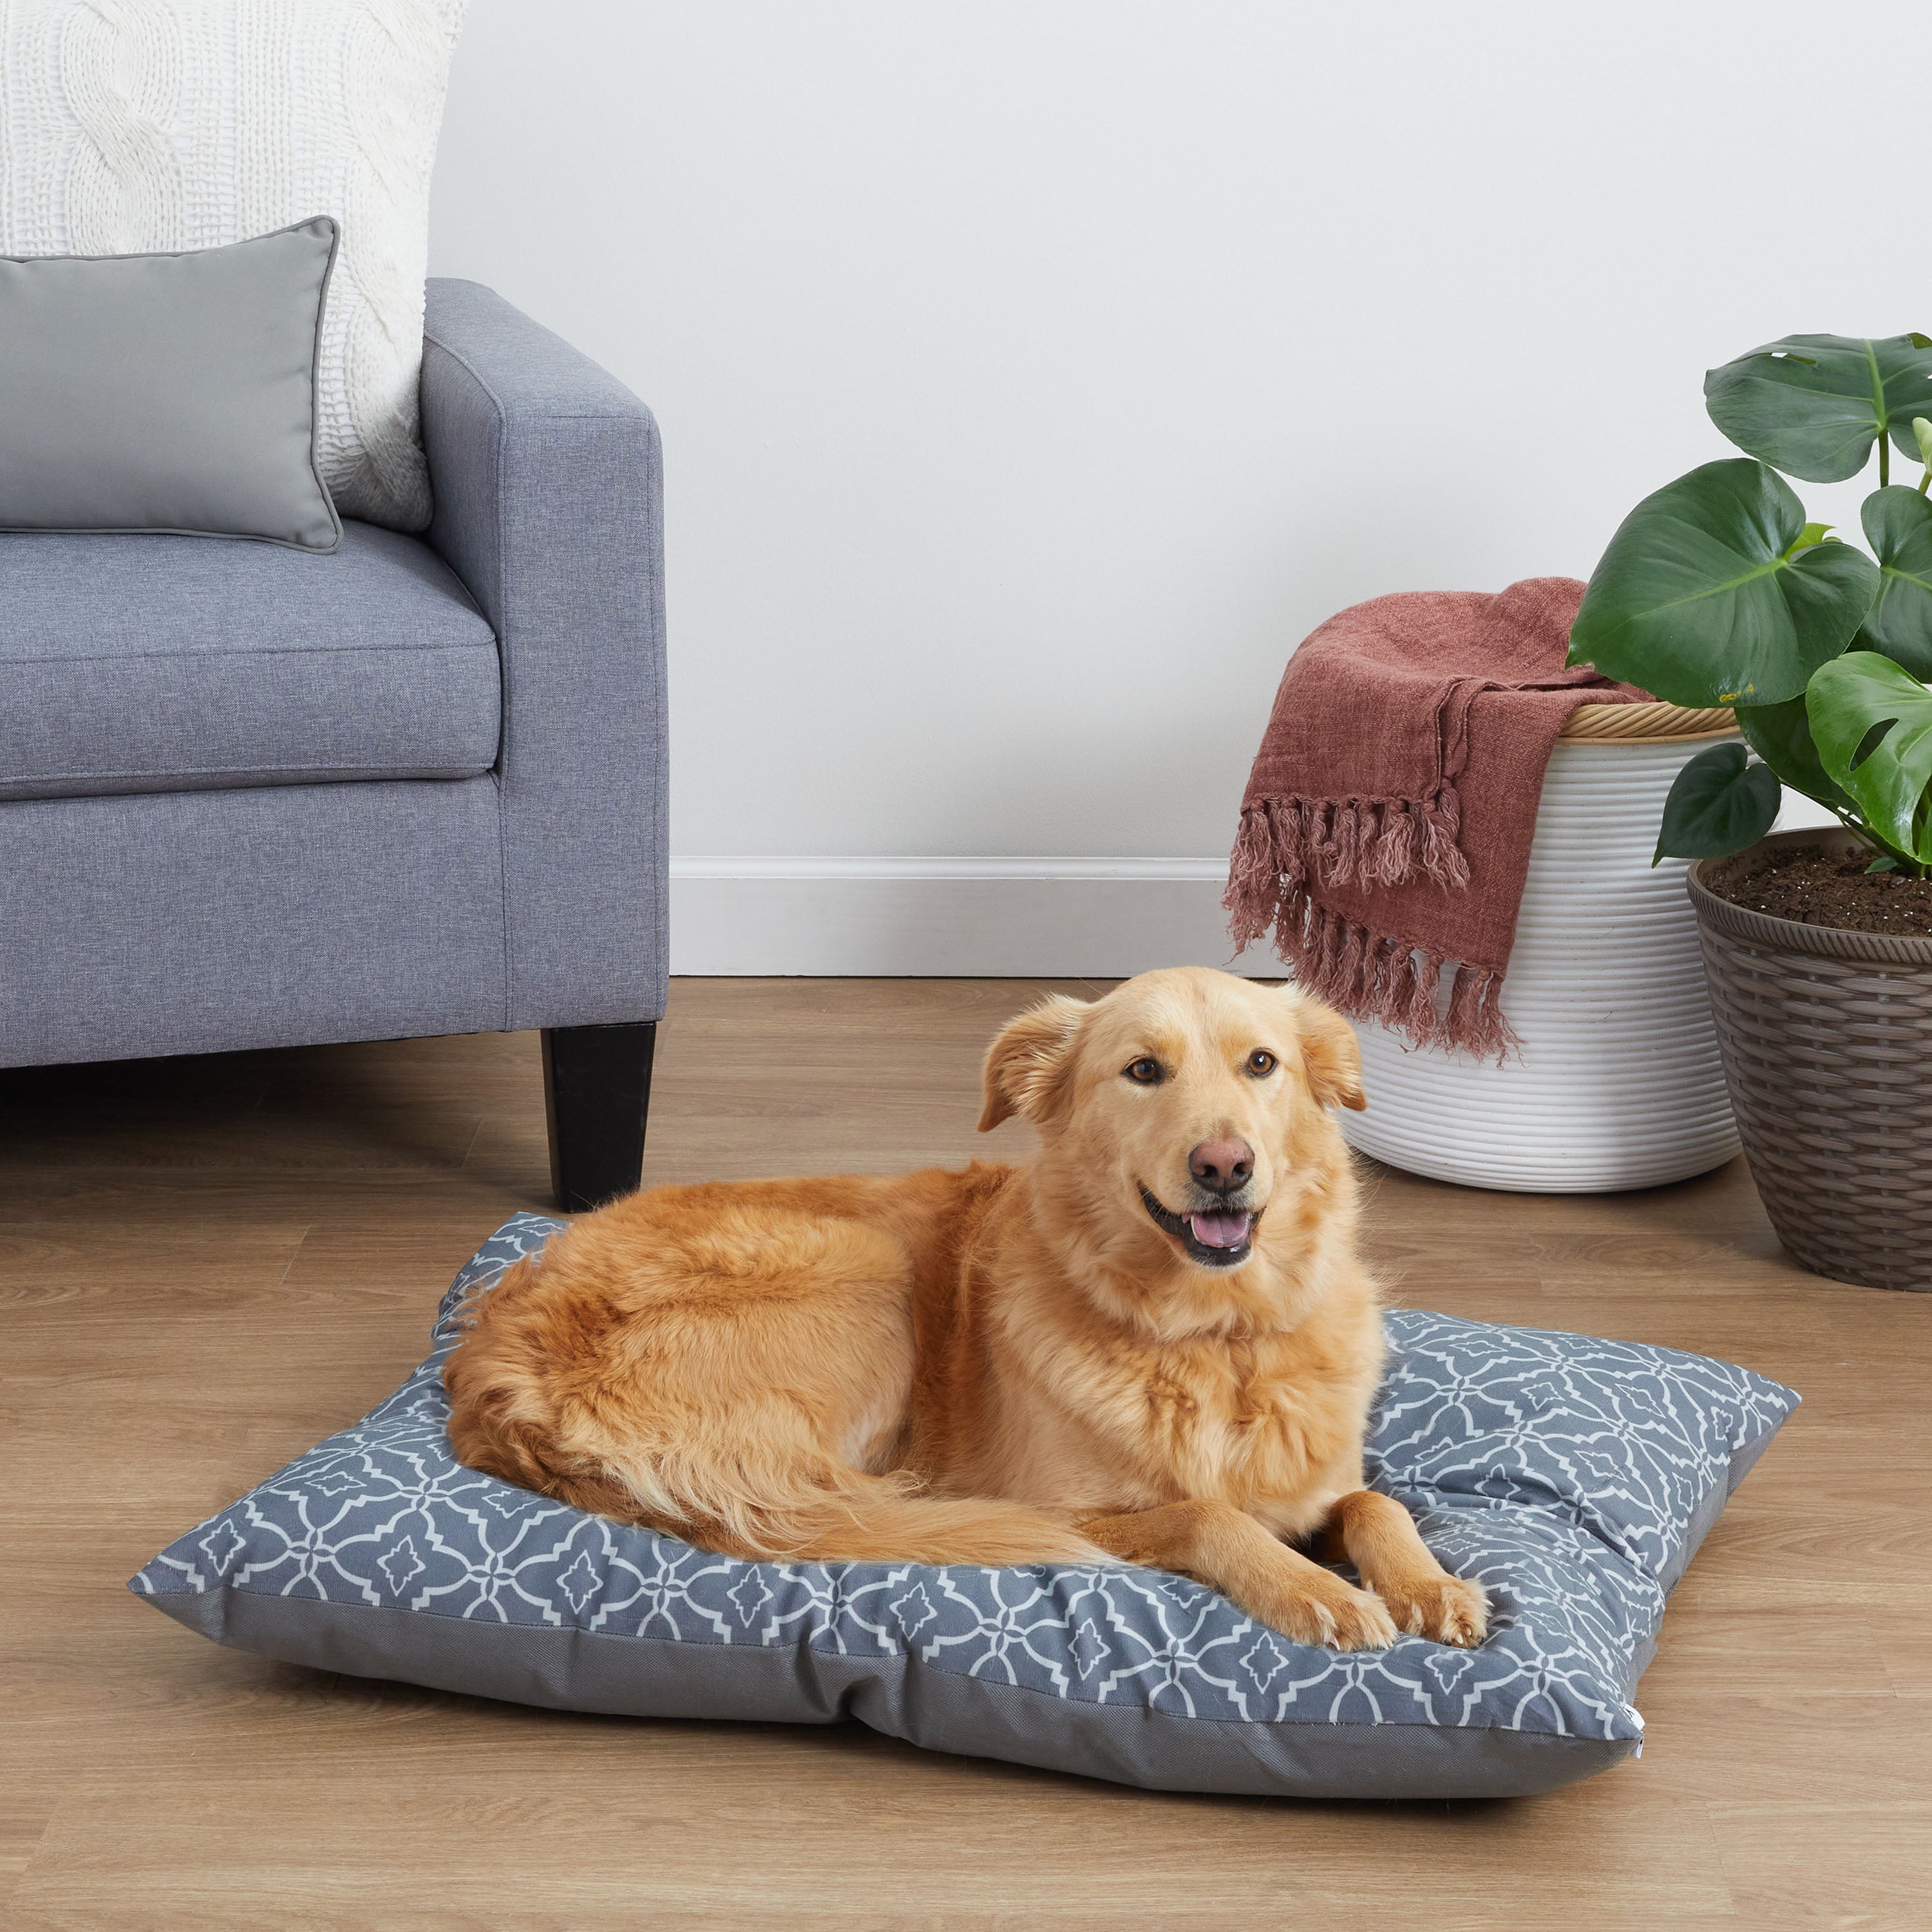 Vibrant Life Luxe Cuddler Mattress Edition Dog Bed, Medium, 27 inchx21 inch, Up to 40lbs, Size: 27 inch x 21 inch x 7 inch